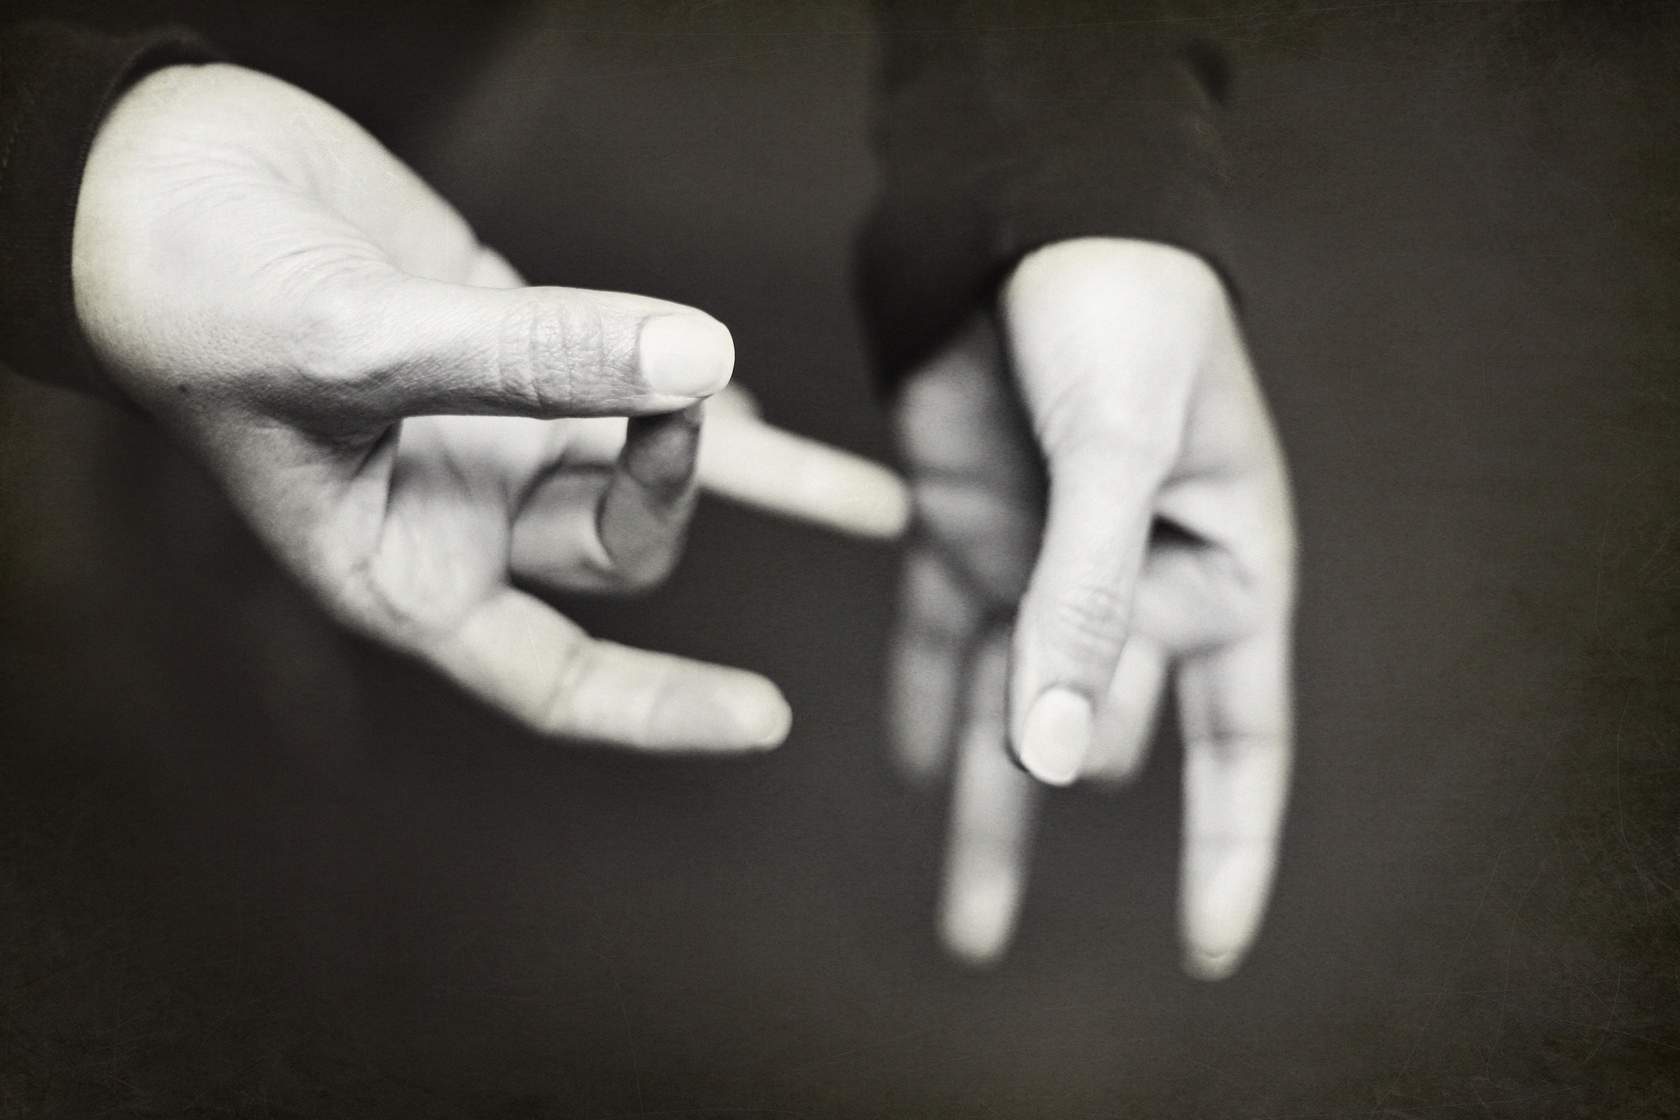 A black and white photo of two hands making a gesture using Sign Language.